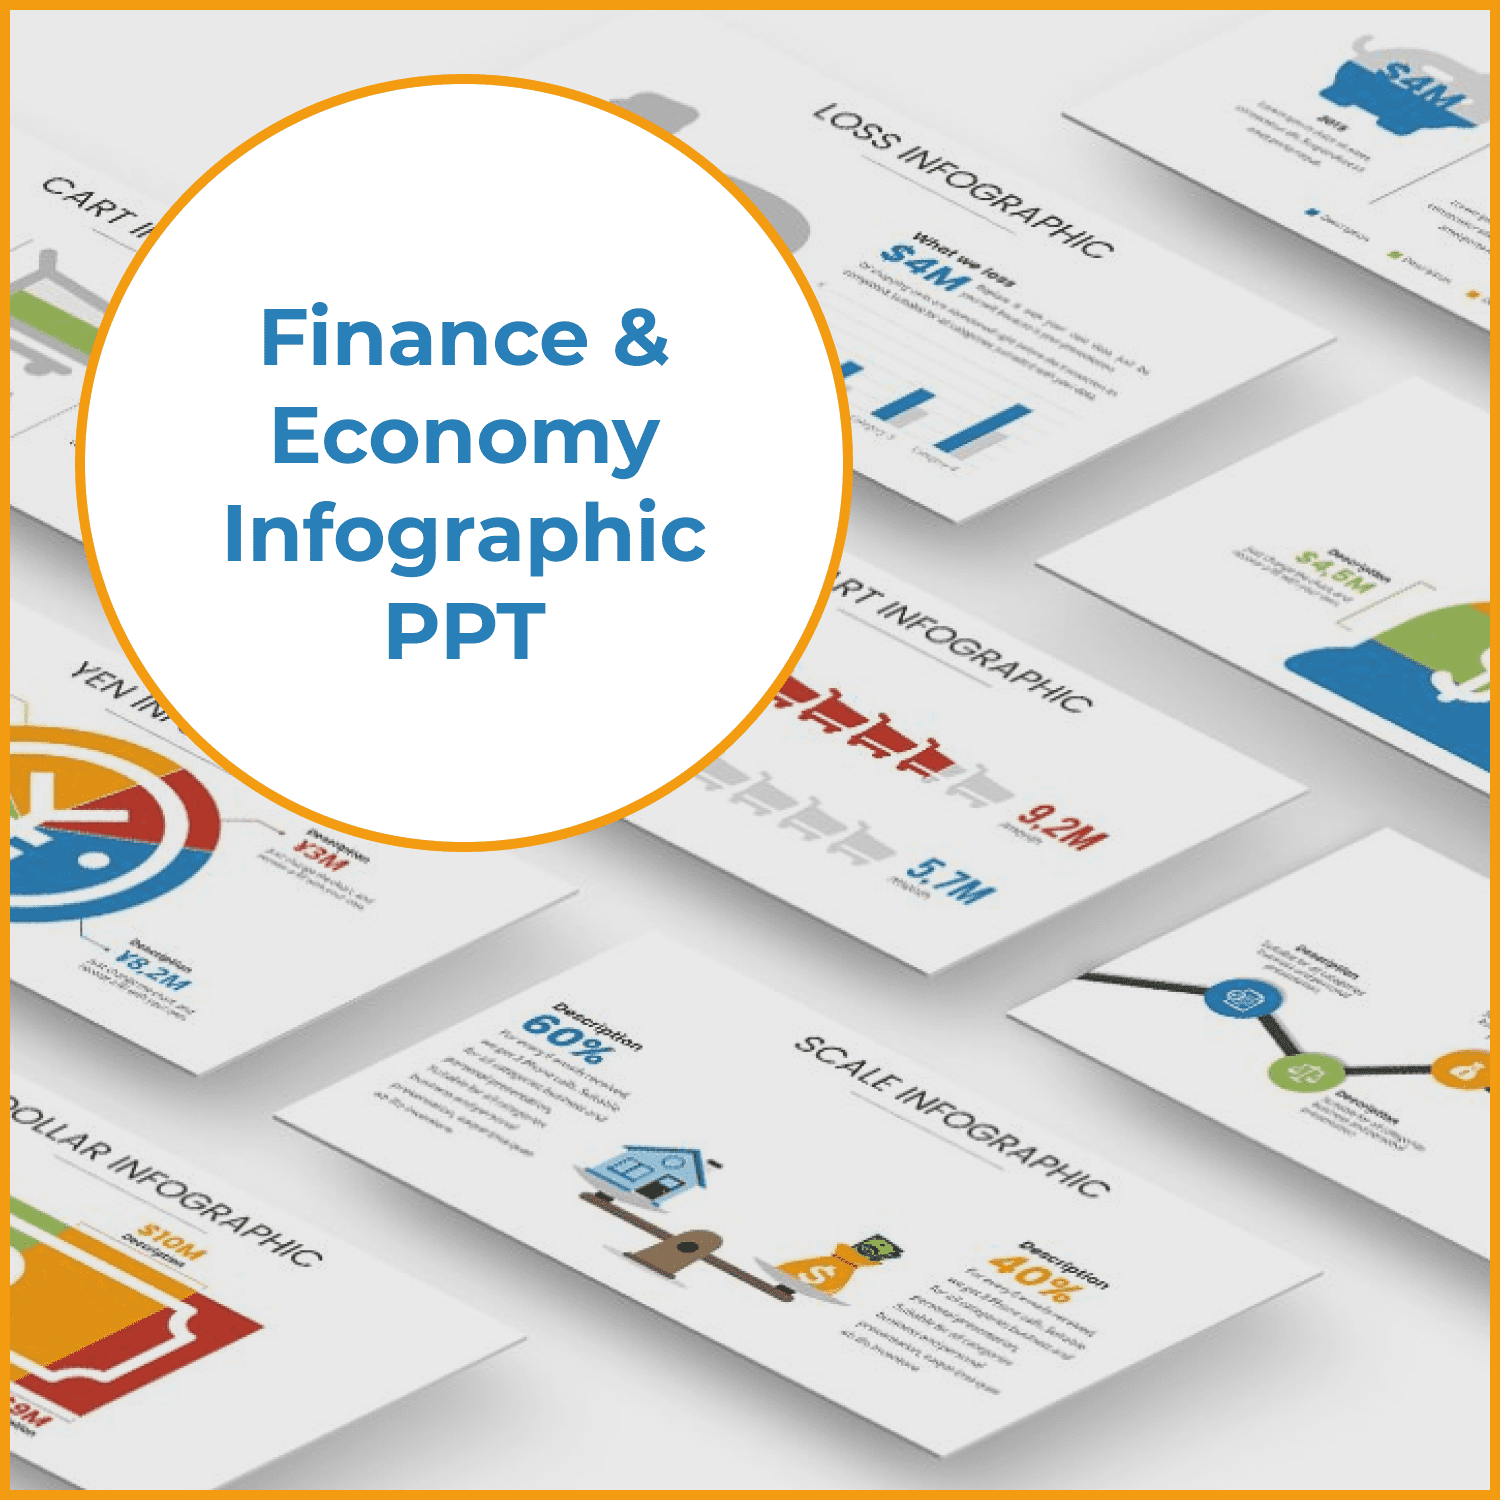 Finance & Economy Infographic PPT cover image.